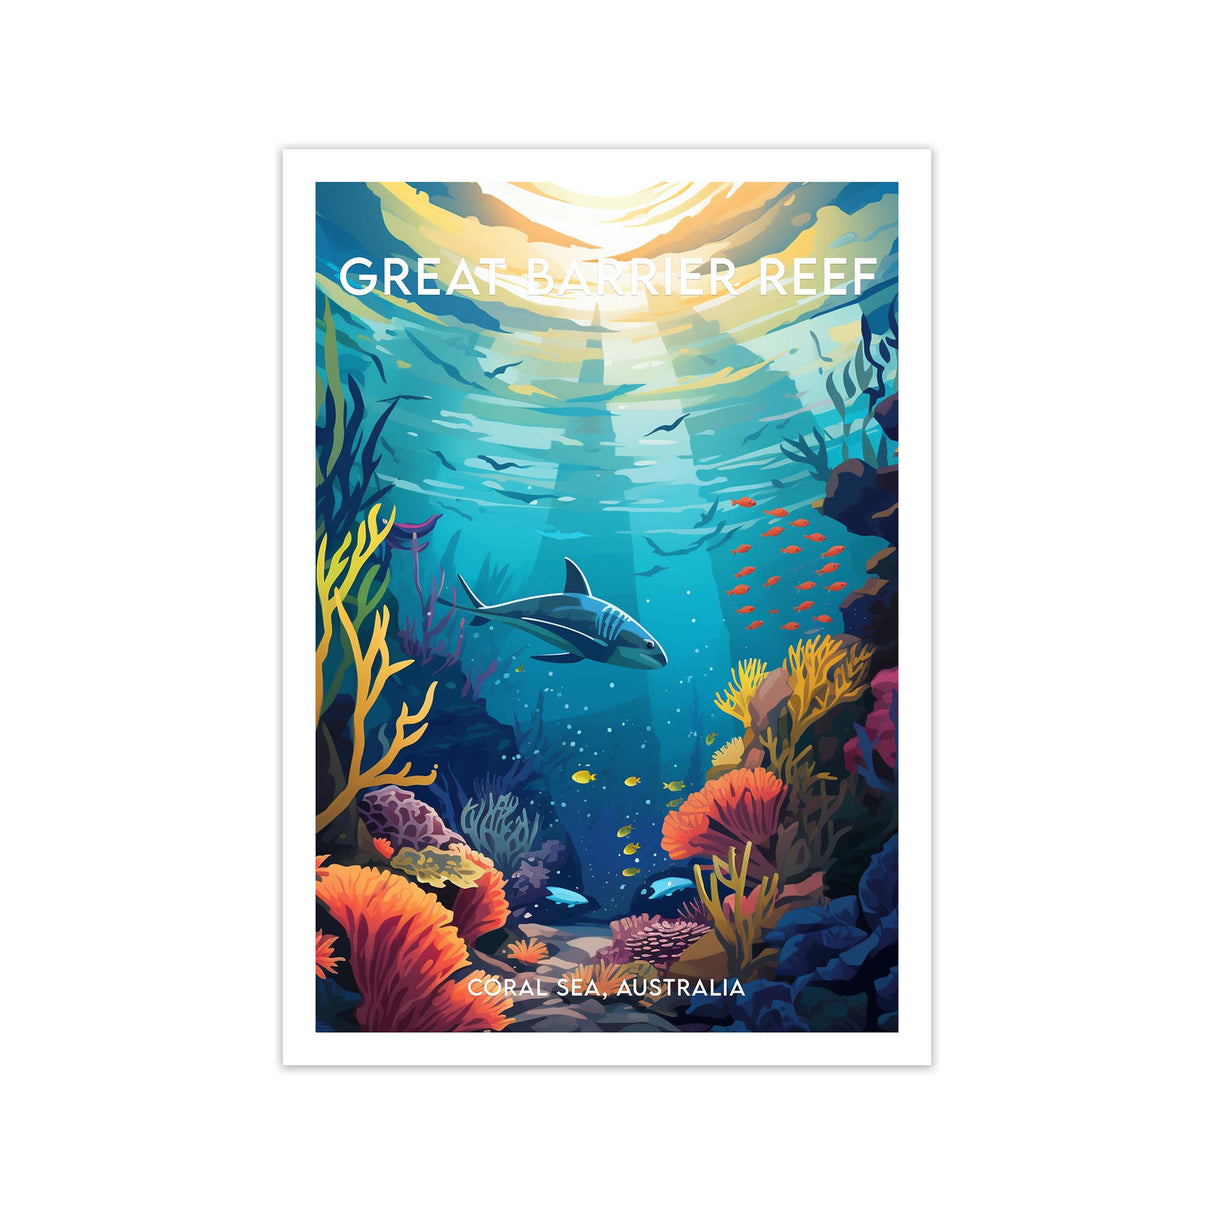 Great Barrier Reef Poster